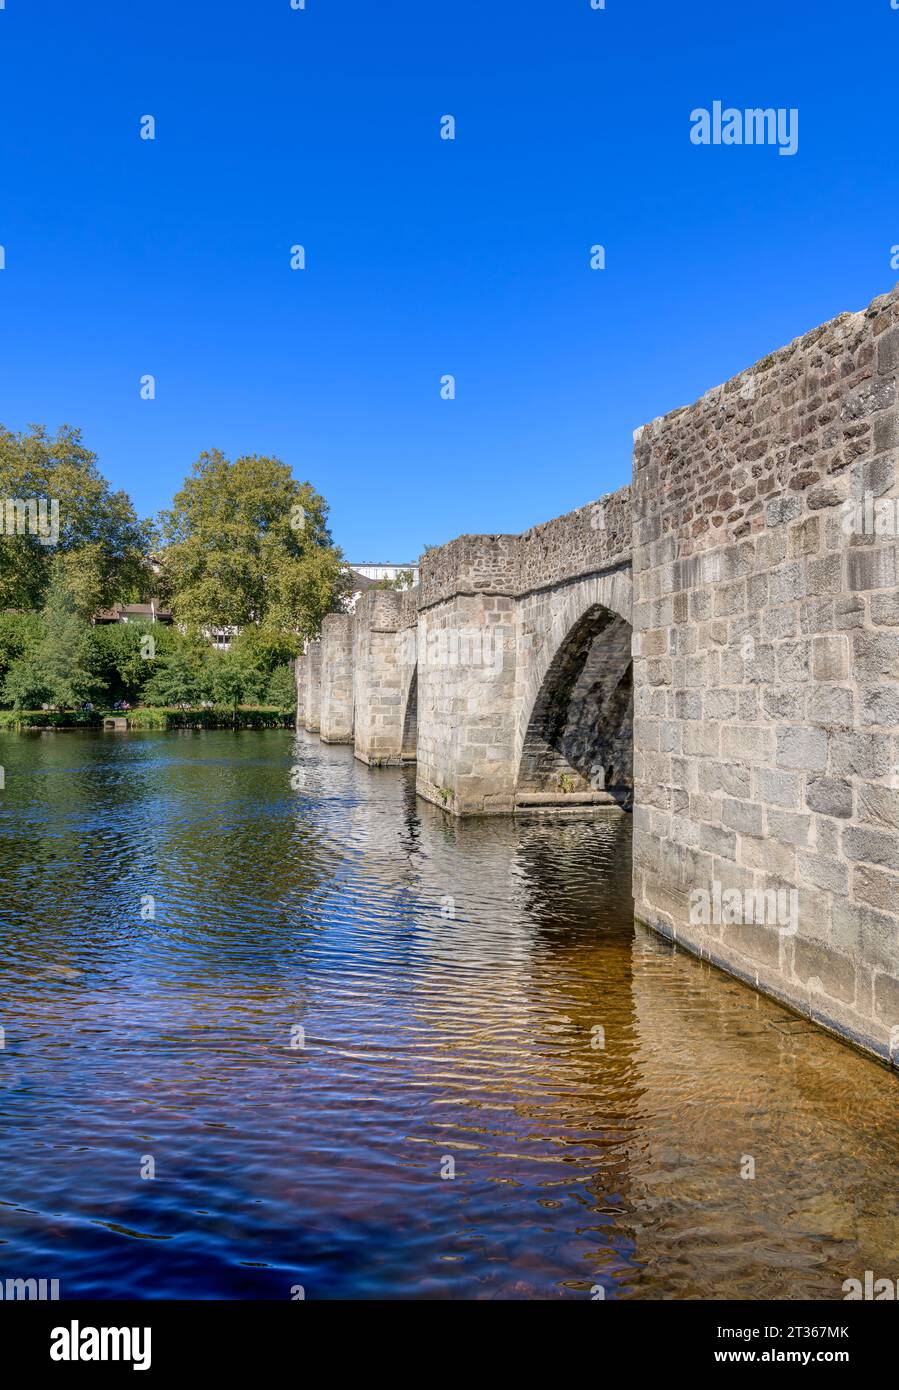 Pont Saint-Étienne in Limoges, France. Links the halves of the city over the river Vienne, completed in 1203. One of the best preserved in France. Stock Photo